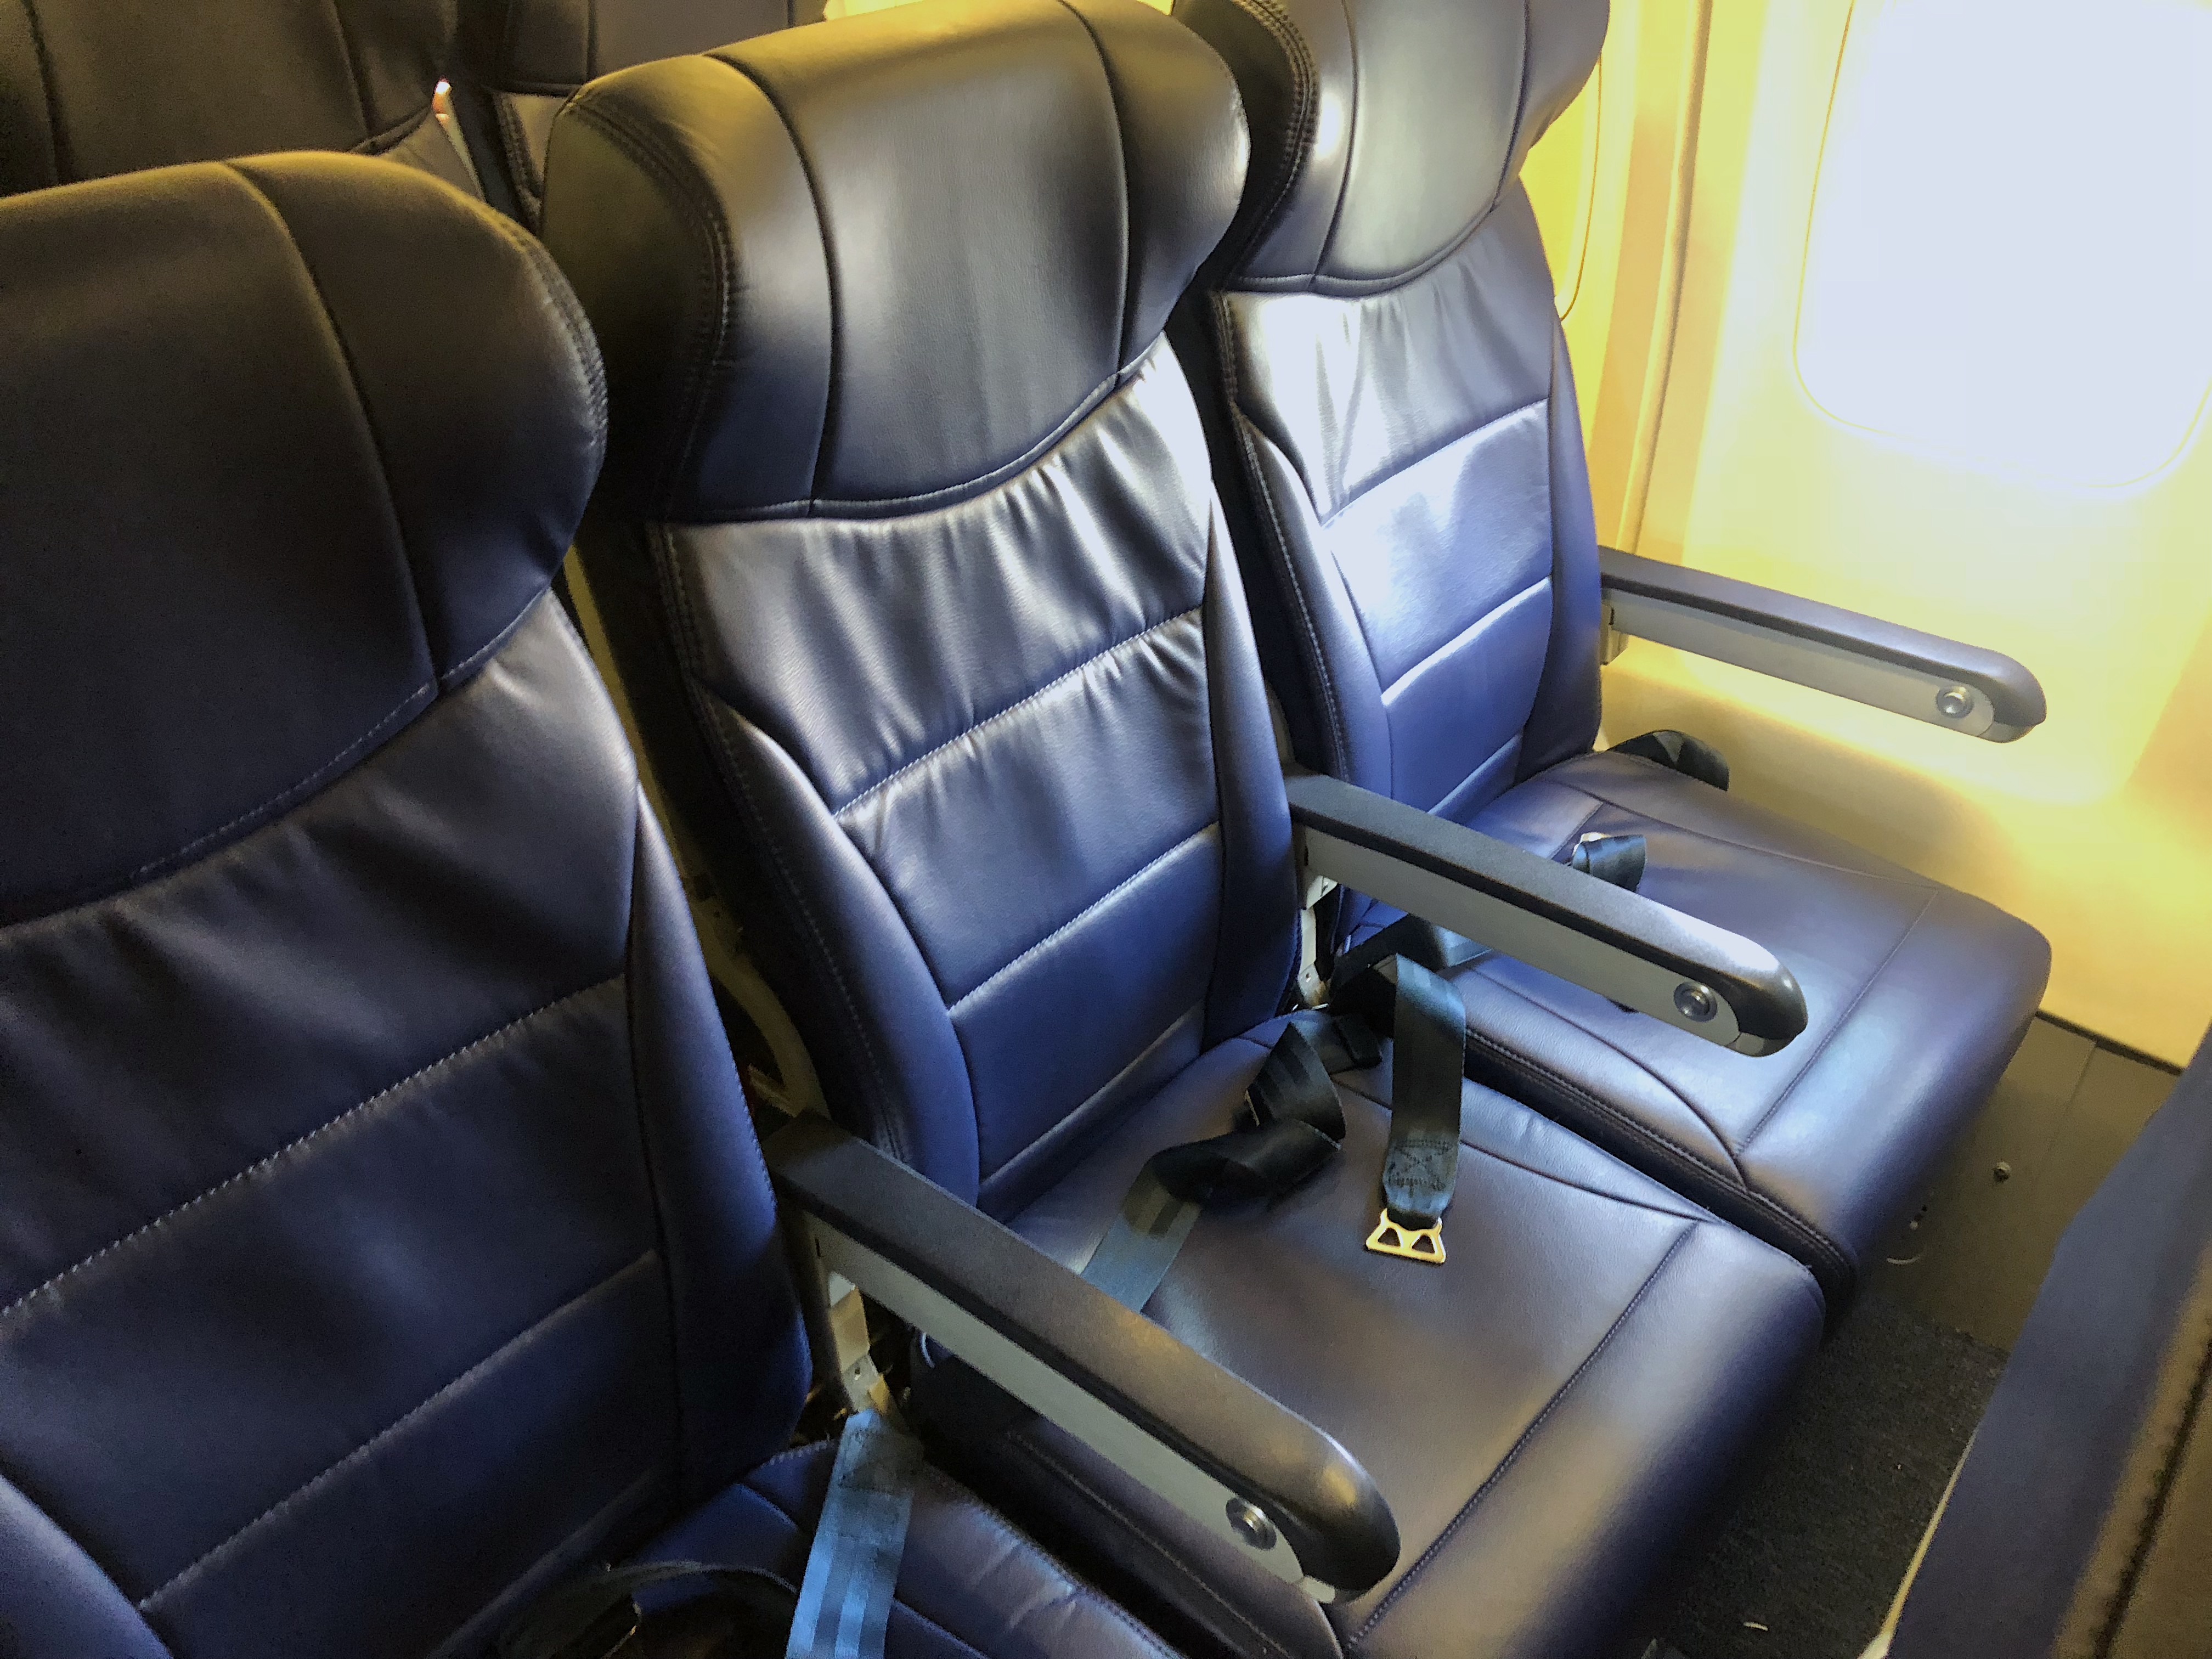 For Comparison: Standard Southwest Airlines Boeing 737 NG Seating